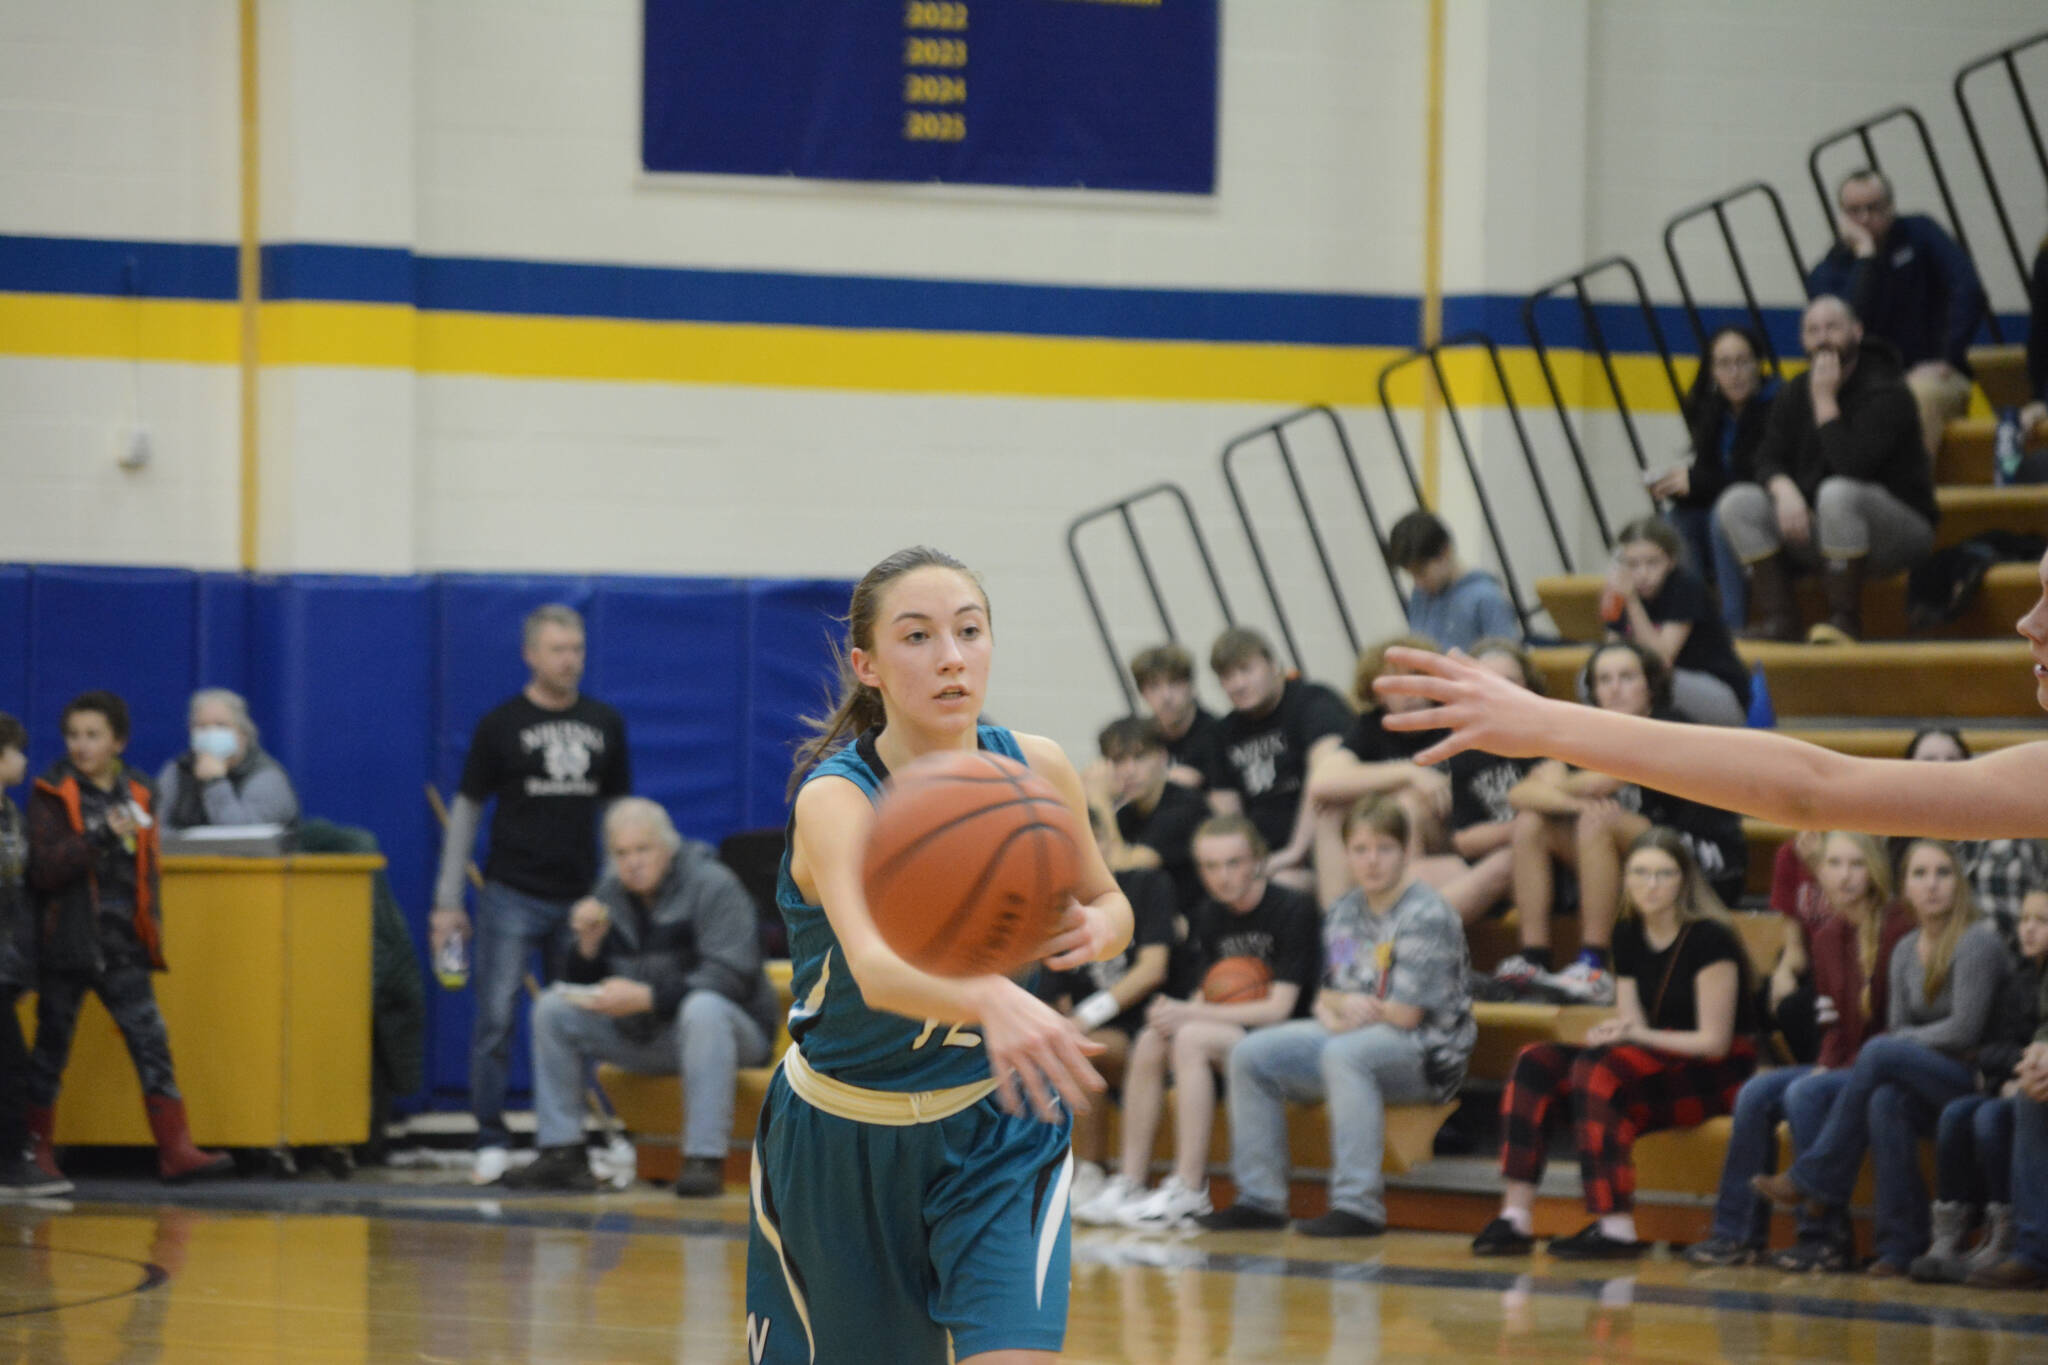 Lady Bulldog Rylee Ellis makes a pass in a game against the Lady Mariners during Senior Night on Friday, Feb. 25, 2022, at the Alice Witte Gym at Homer High School in Homer, Alaska. (Photo by Michael Armstrong/Homer News)